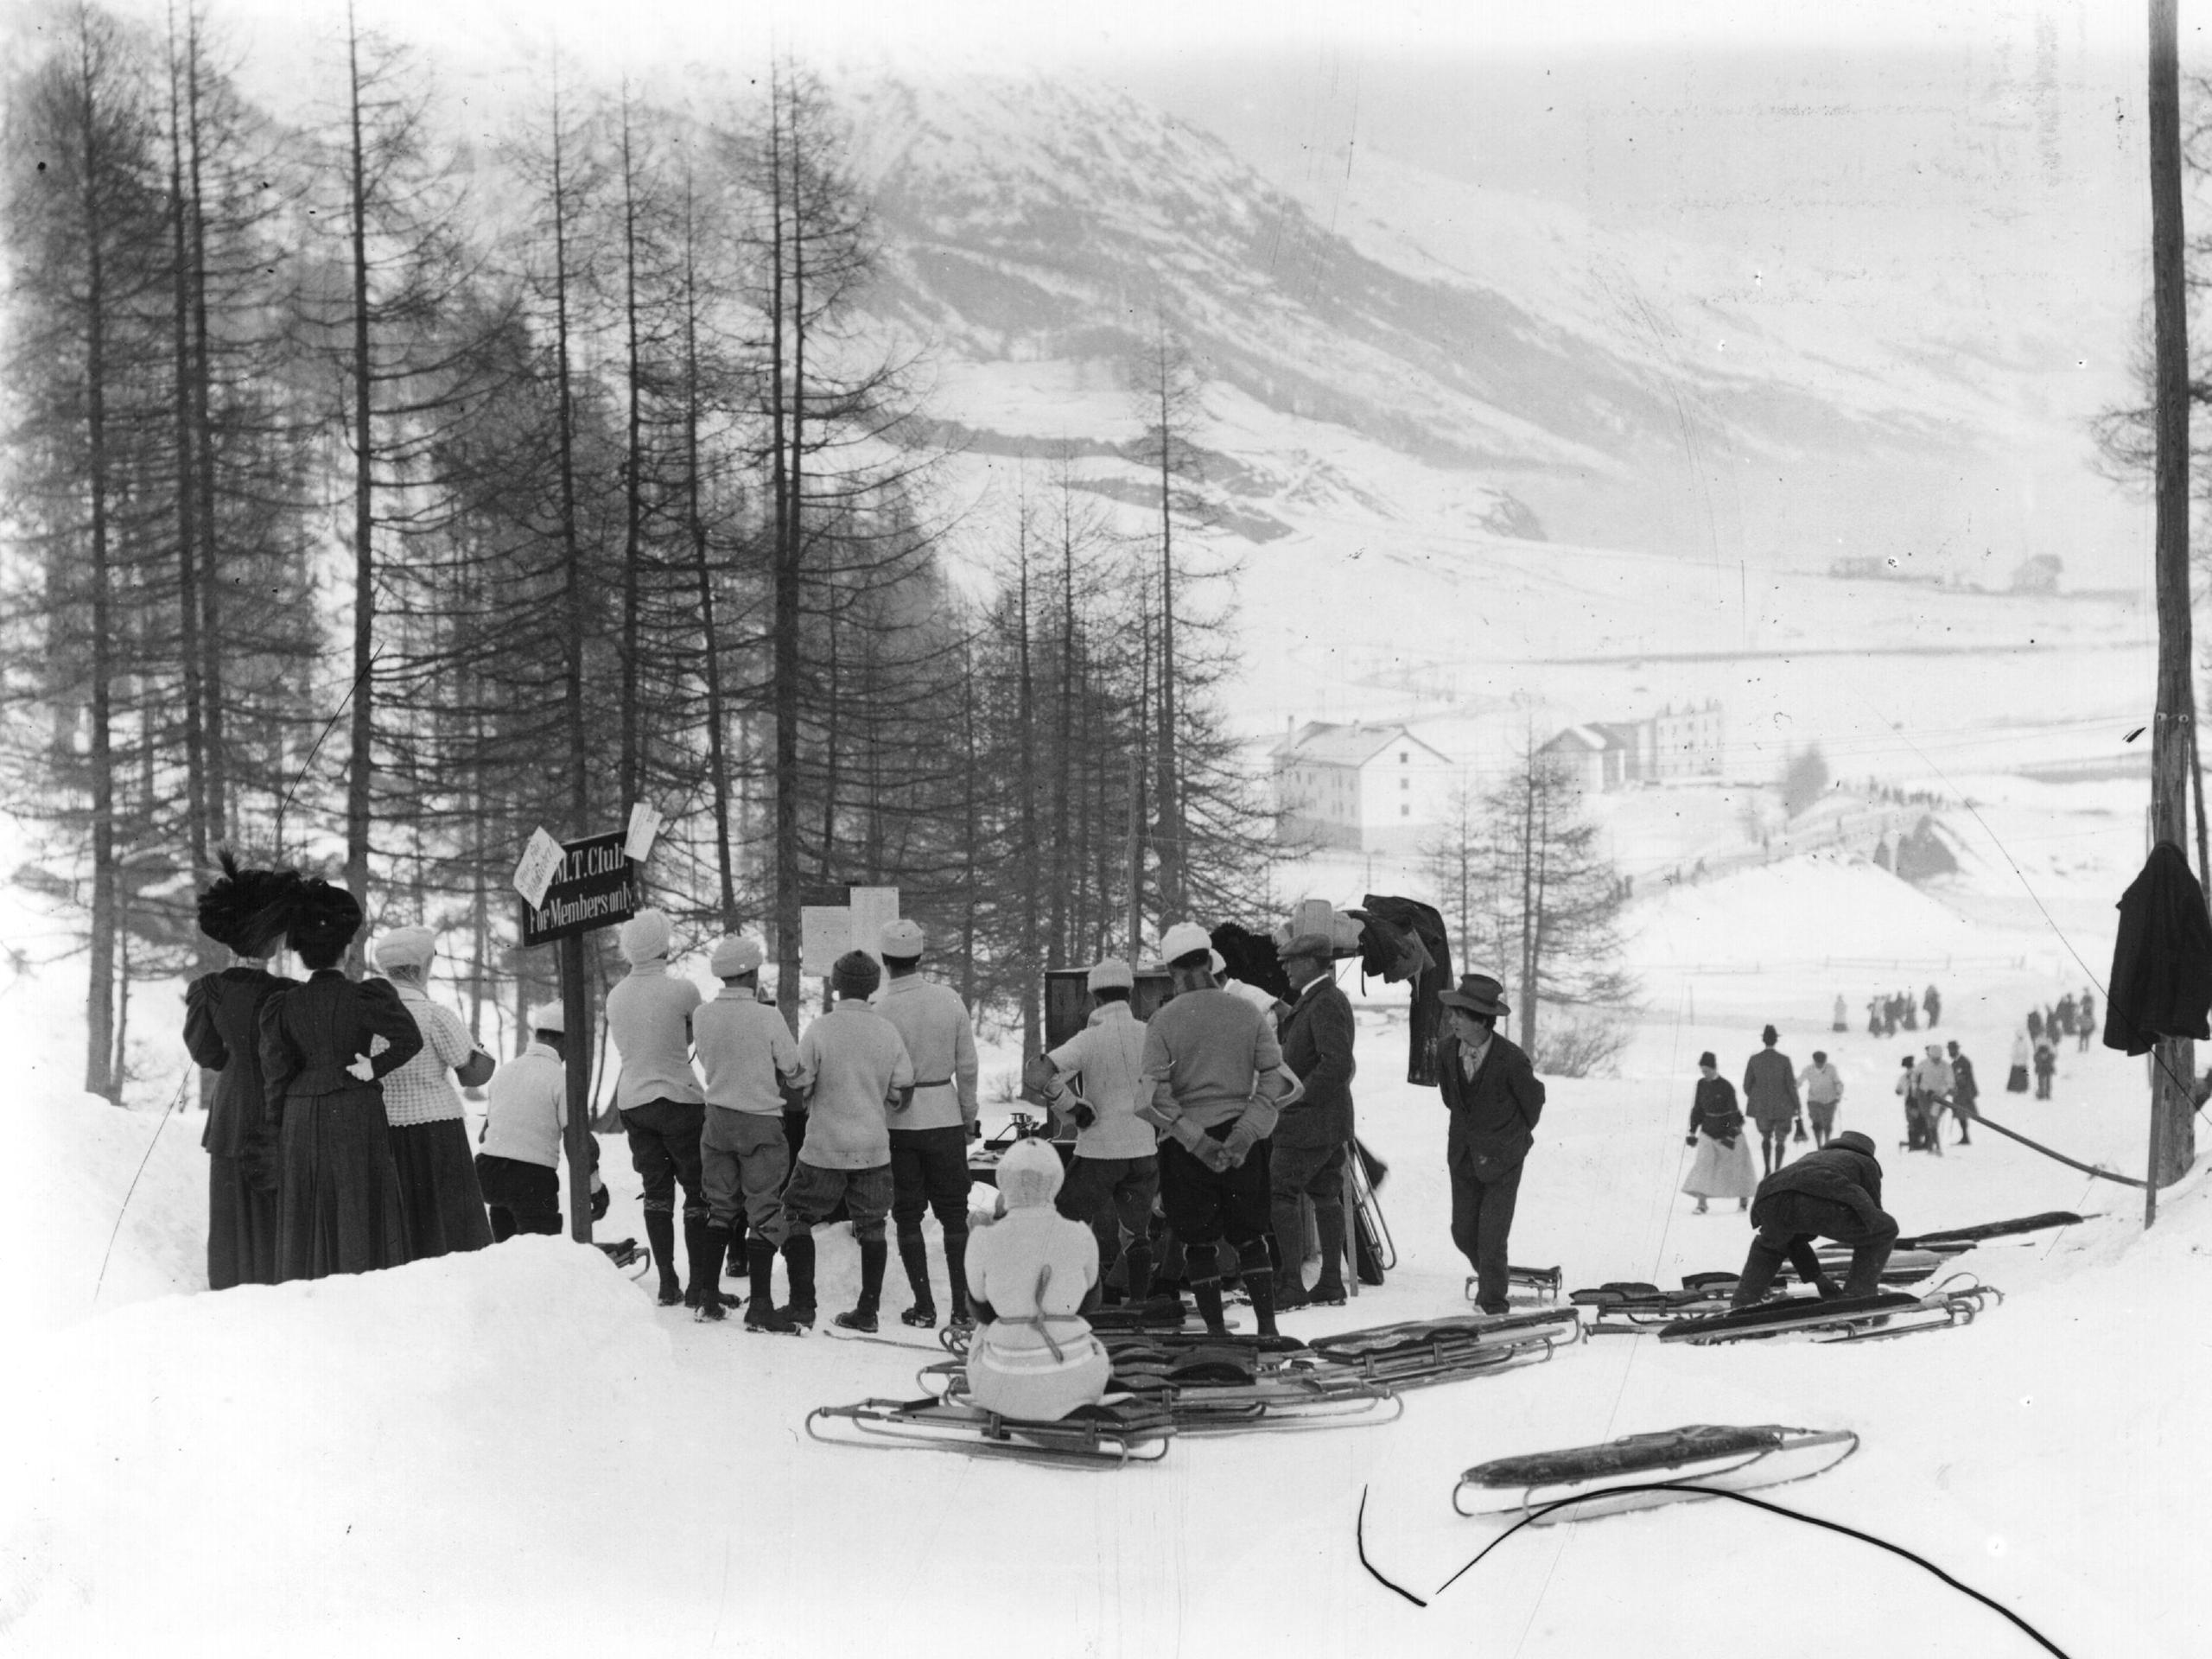 Skeleton competitors with their toboggans at the start of the Cresta Run, 1908.